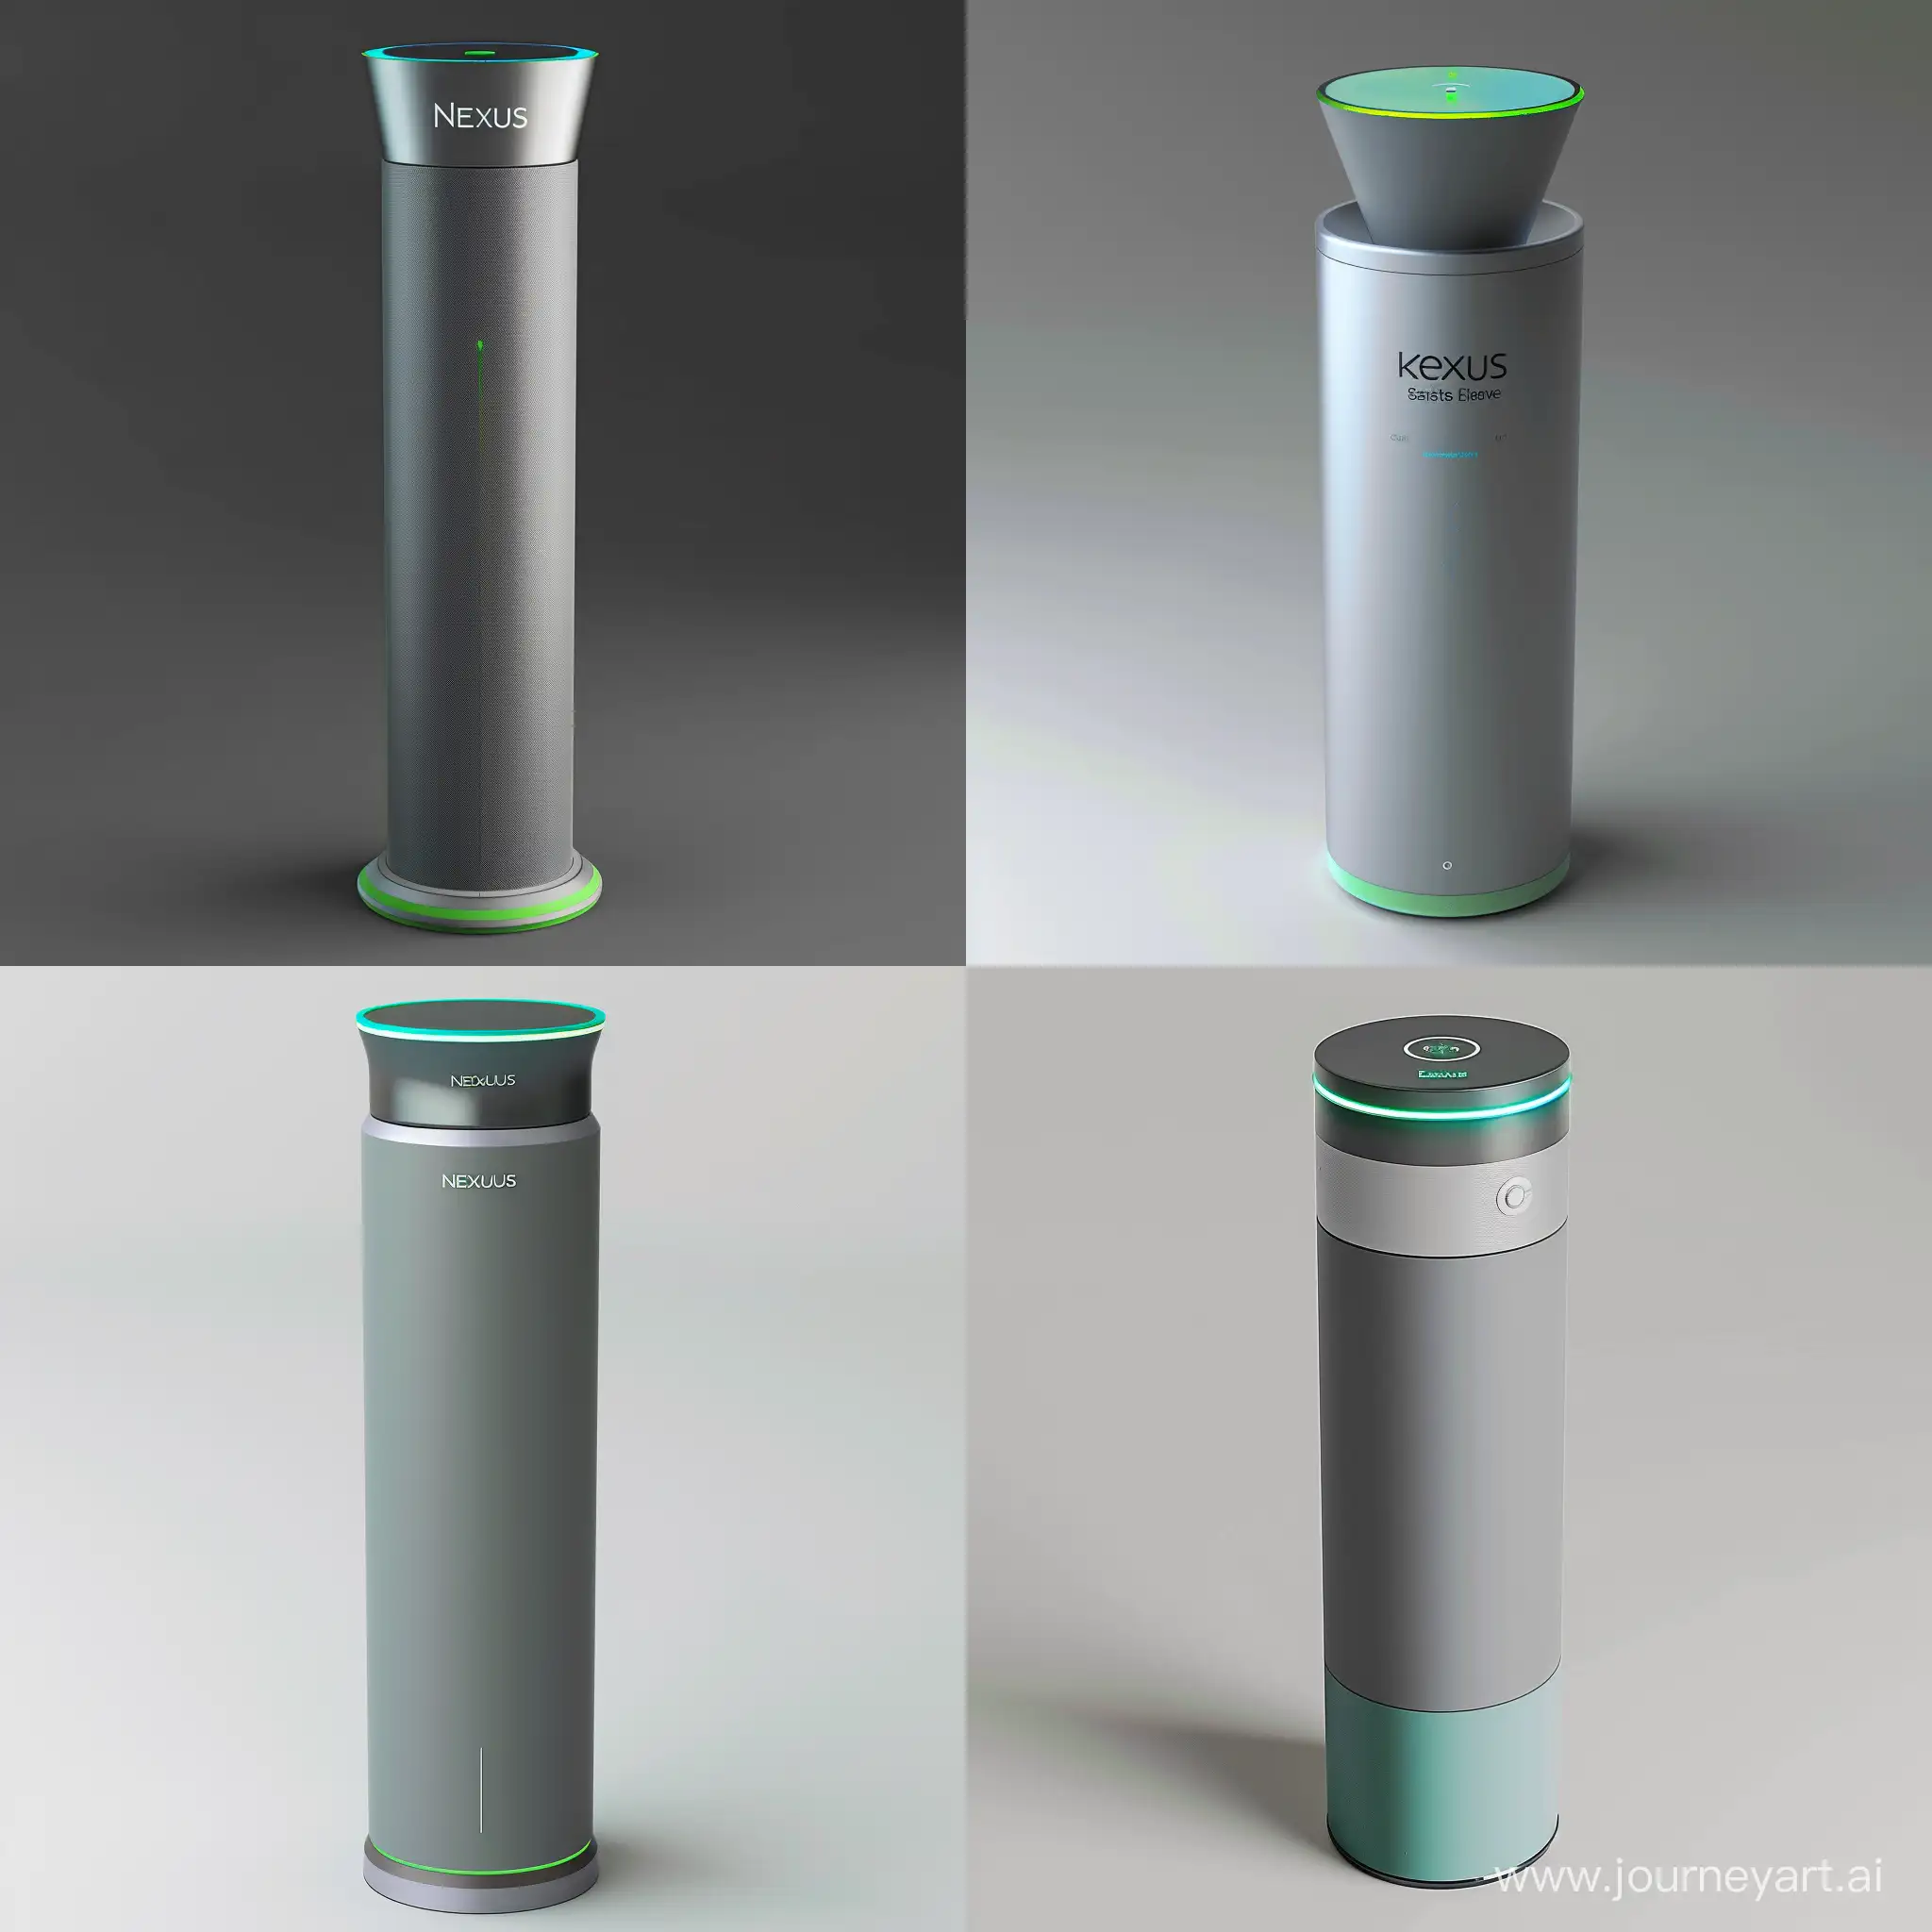 "Design the Nexus Smart Energy Beacon, a smart home device that marries sustainability with modern elegance. It should have a cylindrical shape with a tapered top, constructed from matte silver or slate grey recycled aluminum, accented with soft green or blue biodegradable plastics. The design features an LED ring at its top for energy usage indicators and ambient lighting. Standing 15 cm tall with a base diameter of 8 cm, it includes a touch-sensitive top and a minimalistic OLED screen for displaying energy stats and tips. The device’s logo, simple and modern with a hint of green, underscores its eco-friendly focus. Visualize the Nexus as a centerpiece of smart home technology, highlighting its sleek form, environmental commitment, and intuitive interaction, designed to seamlessly blend into and enhance the modern smart home."realistic style